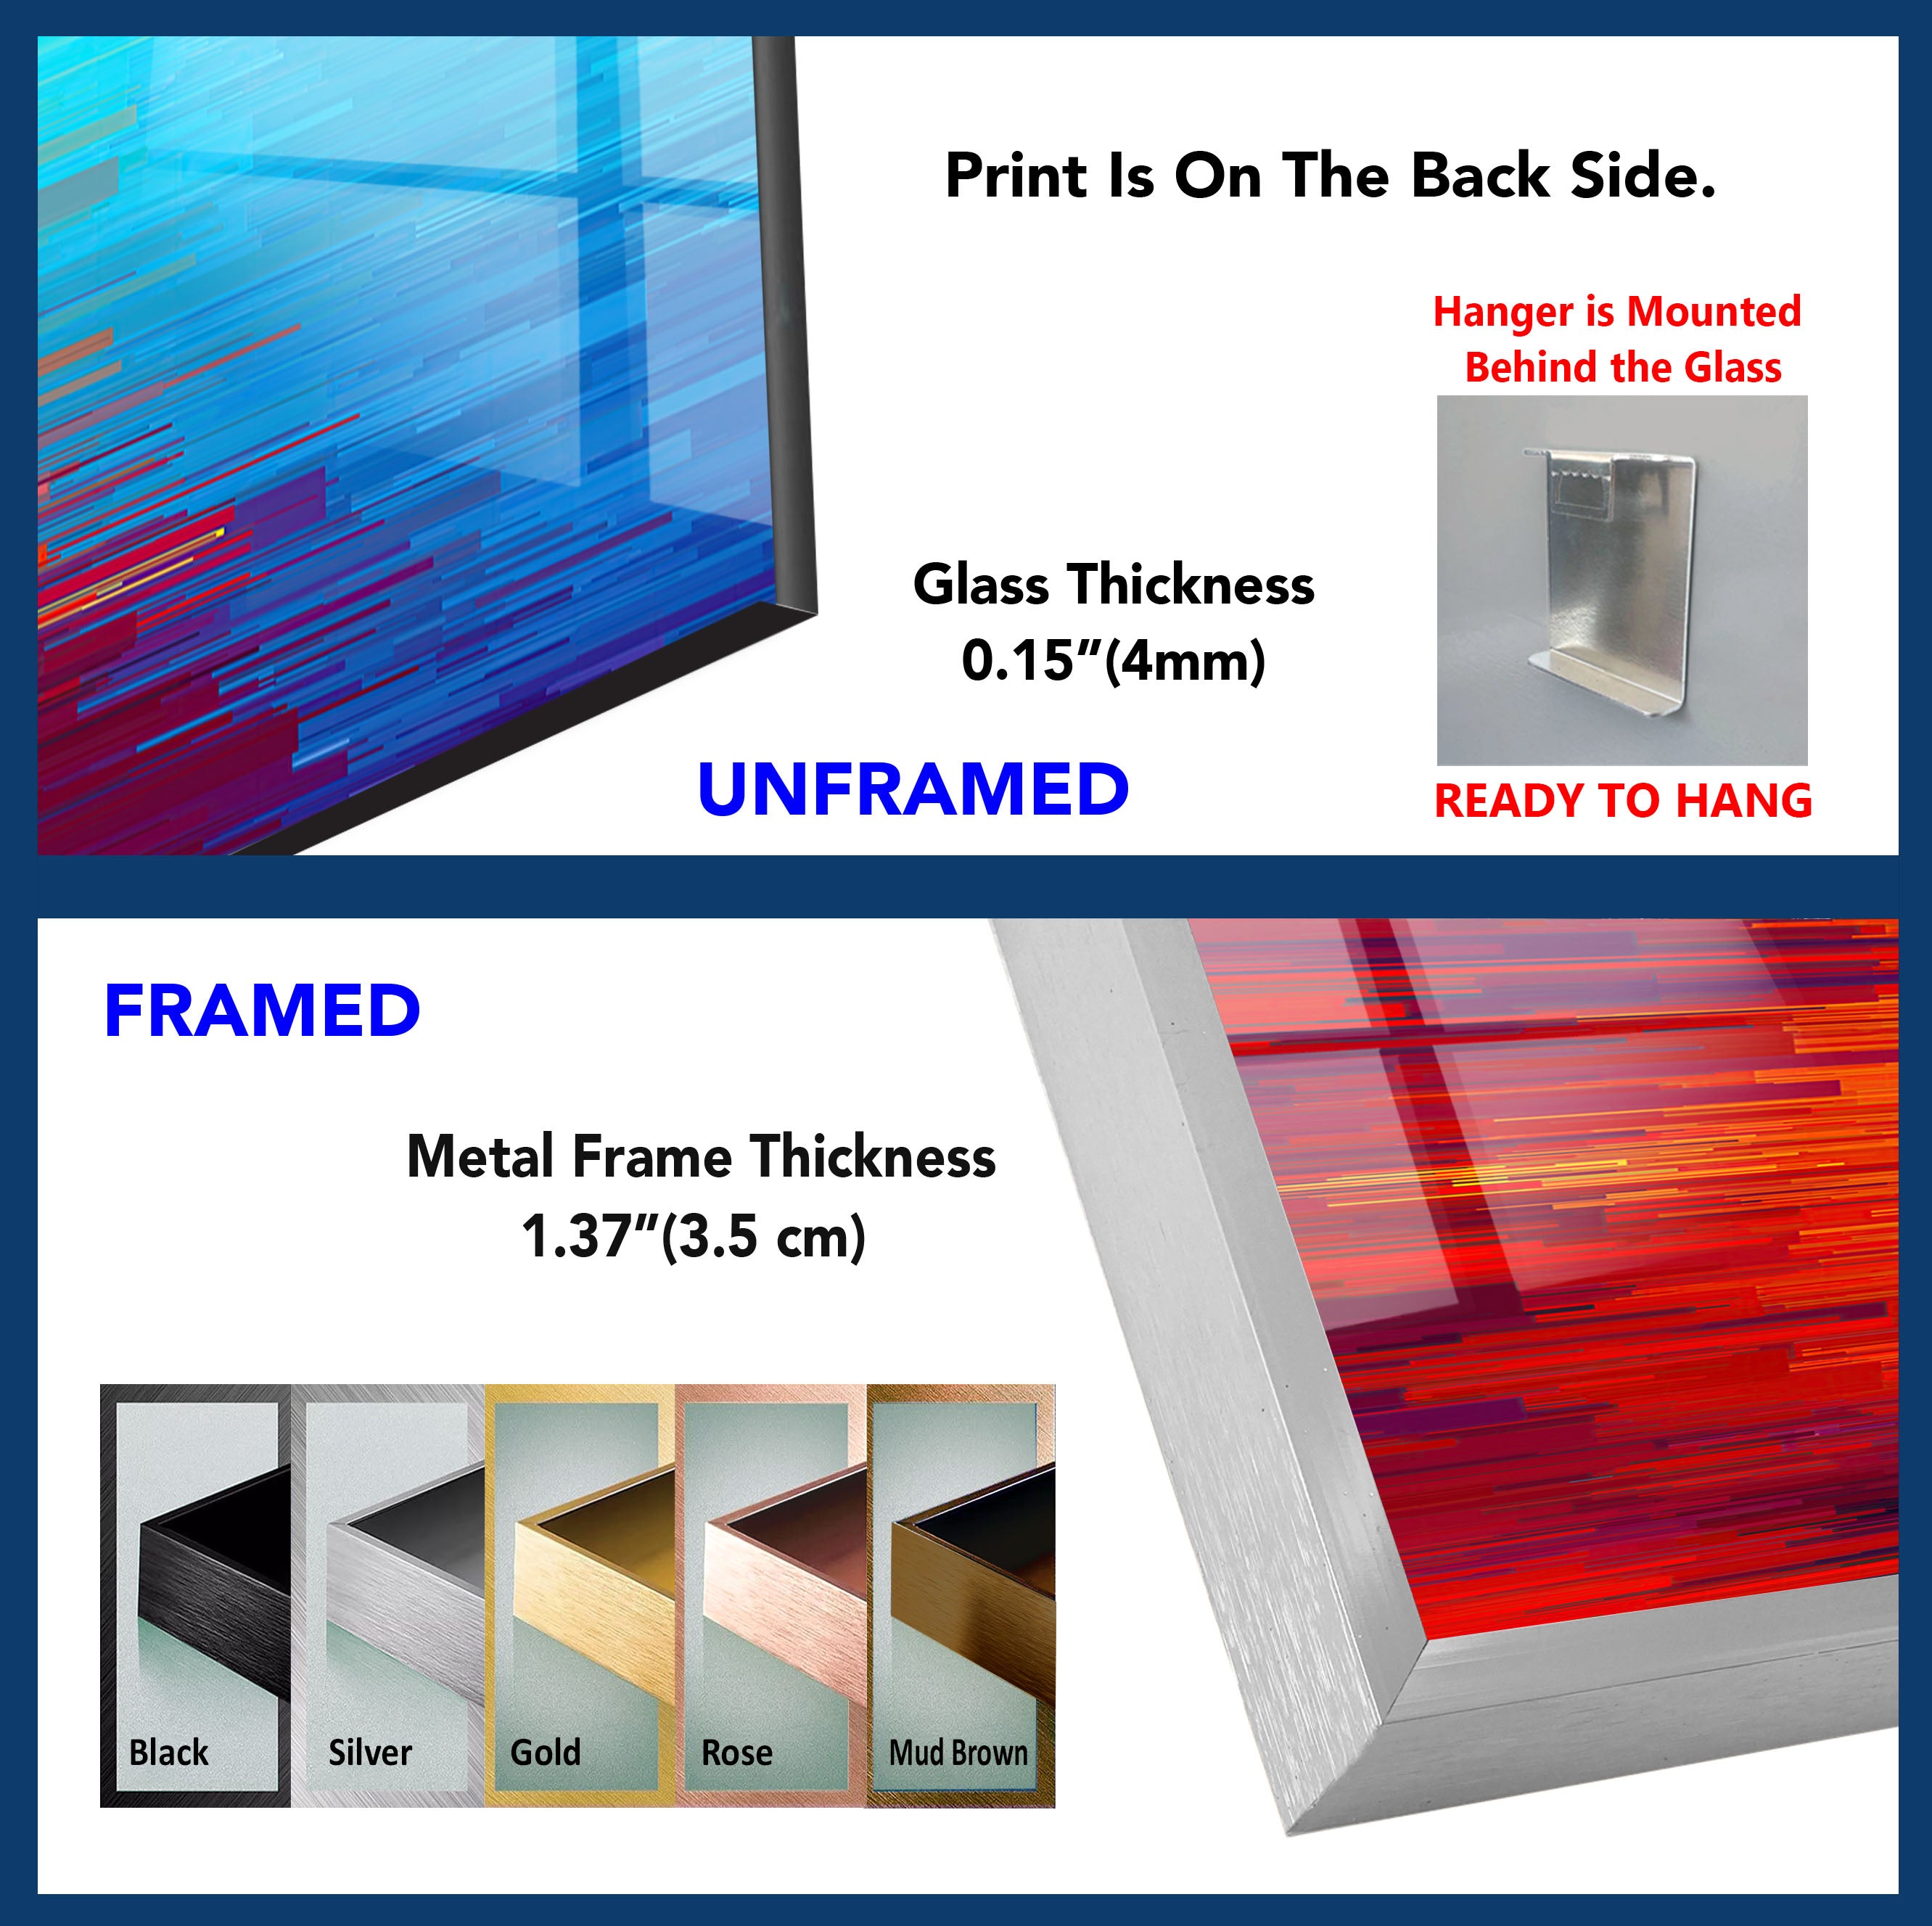 a metal frame with different colors and sizes